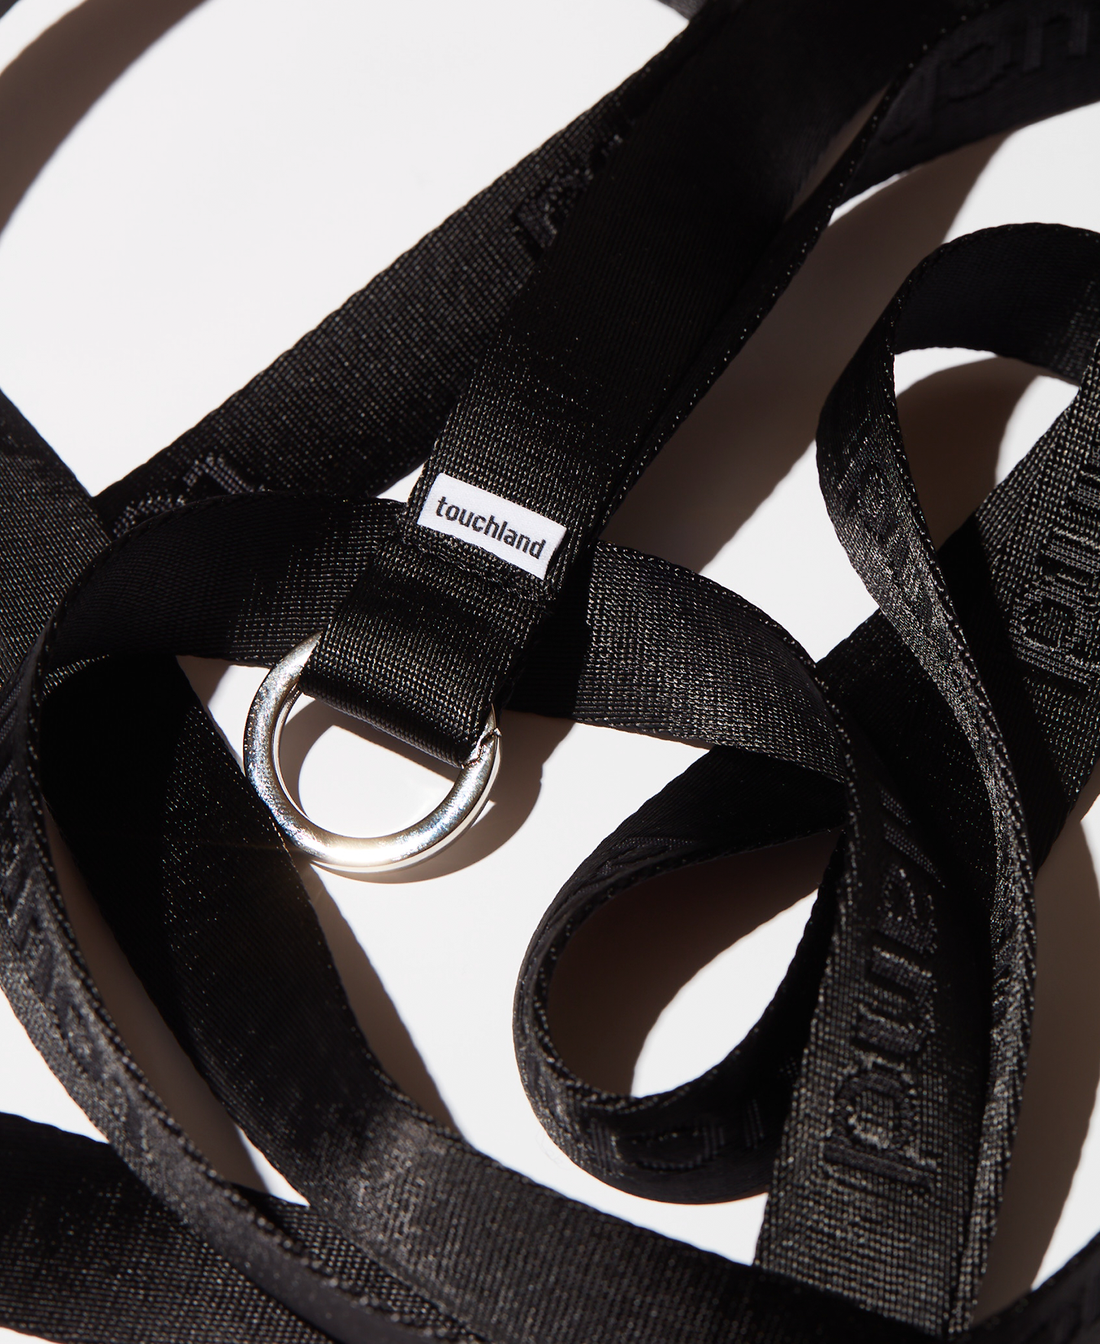 Black tangled lanyard zoomed in on white background